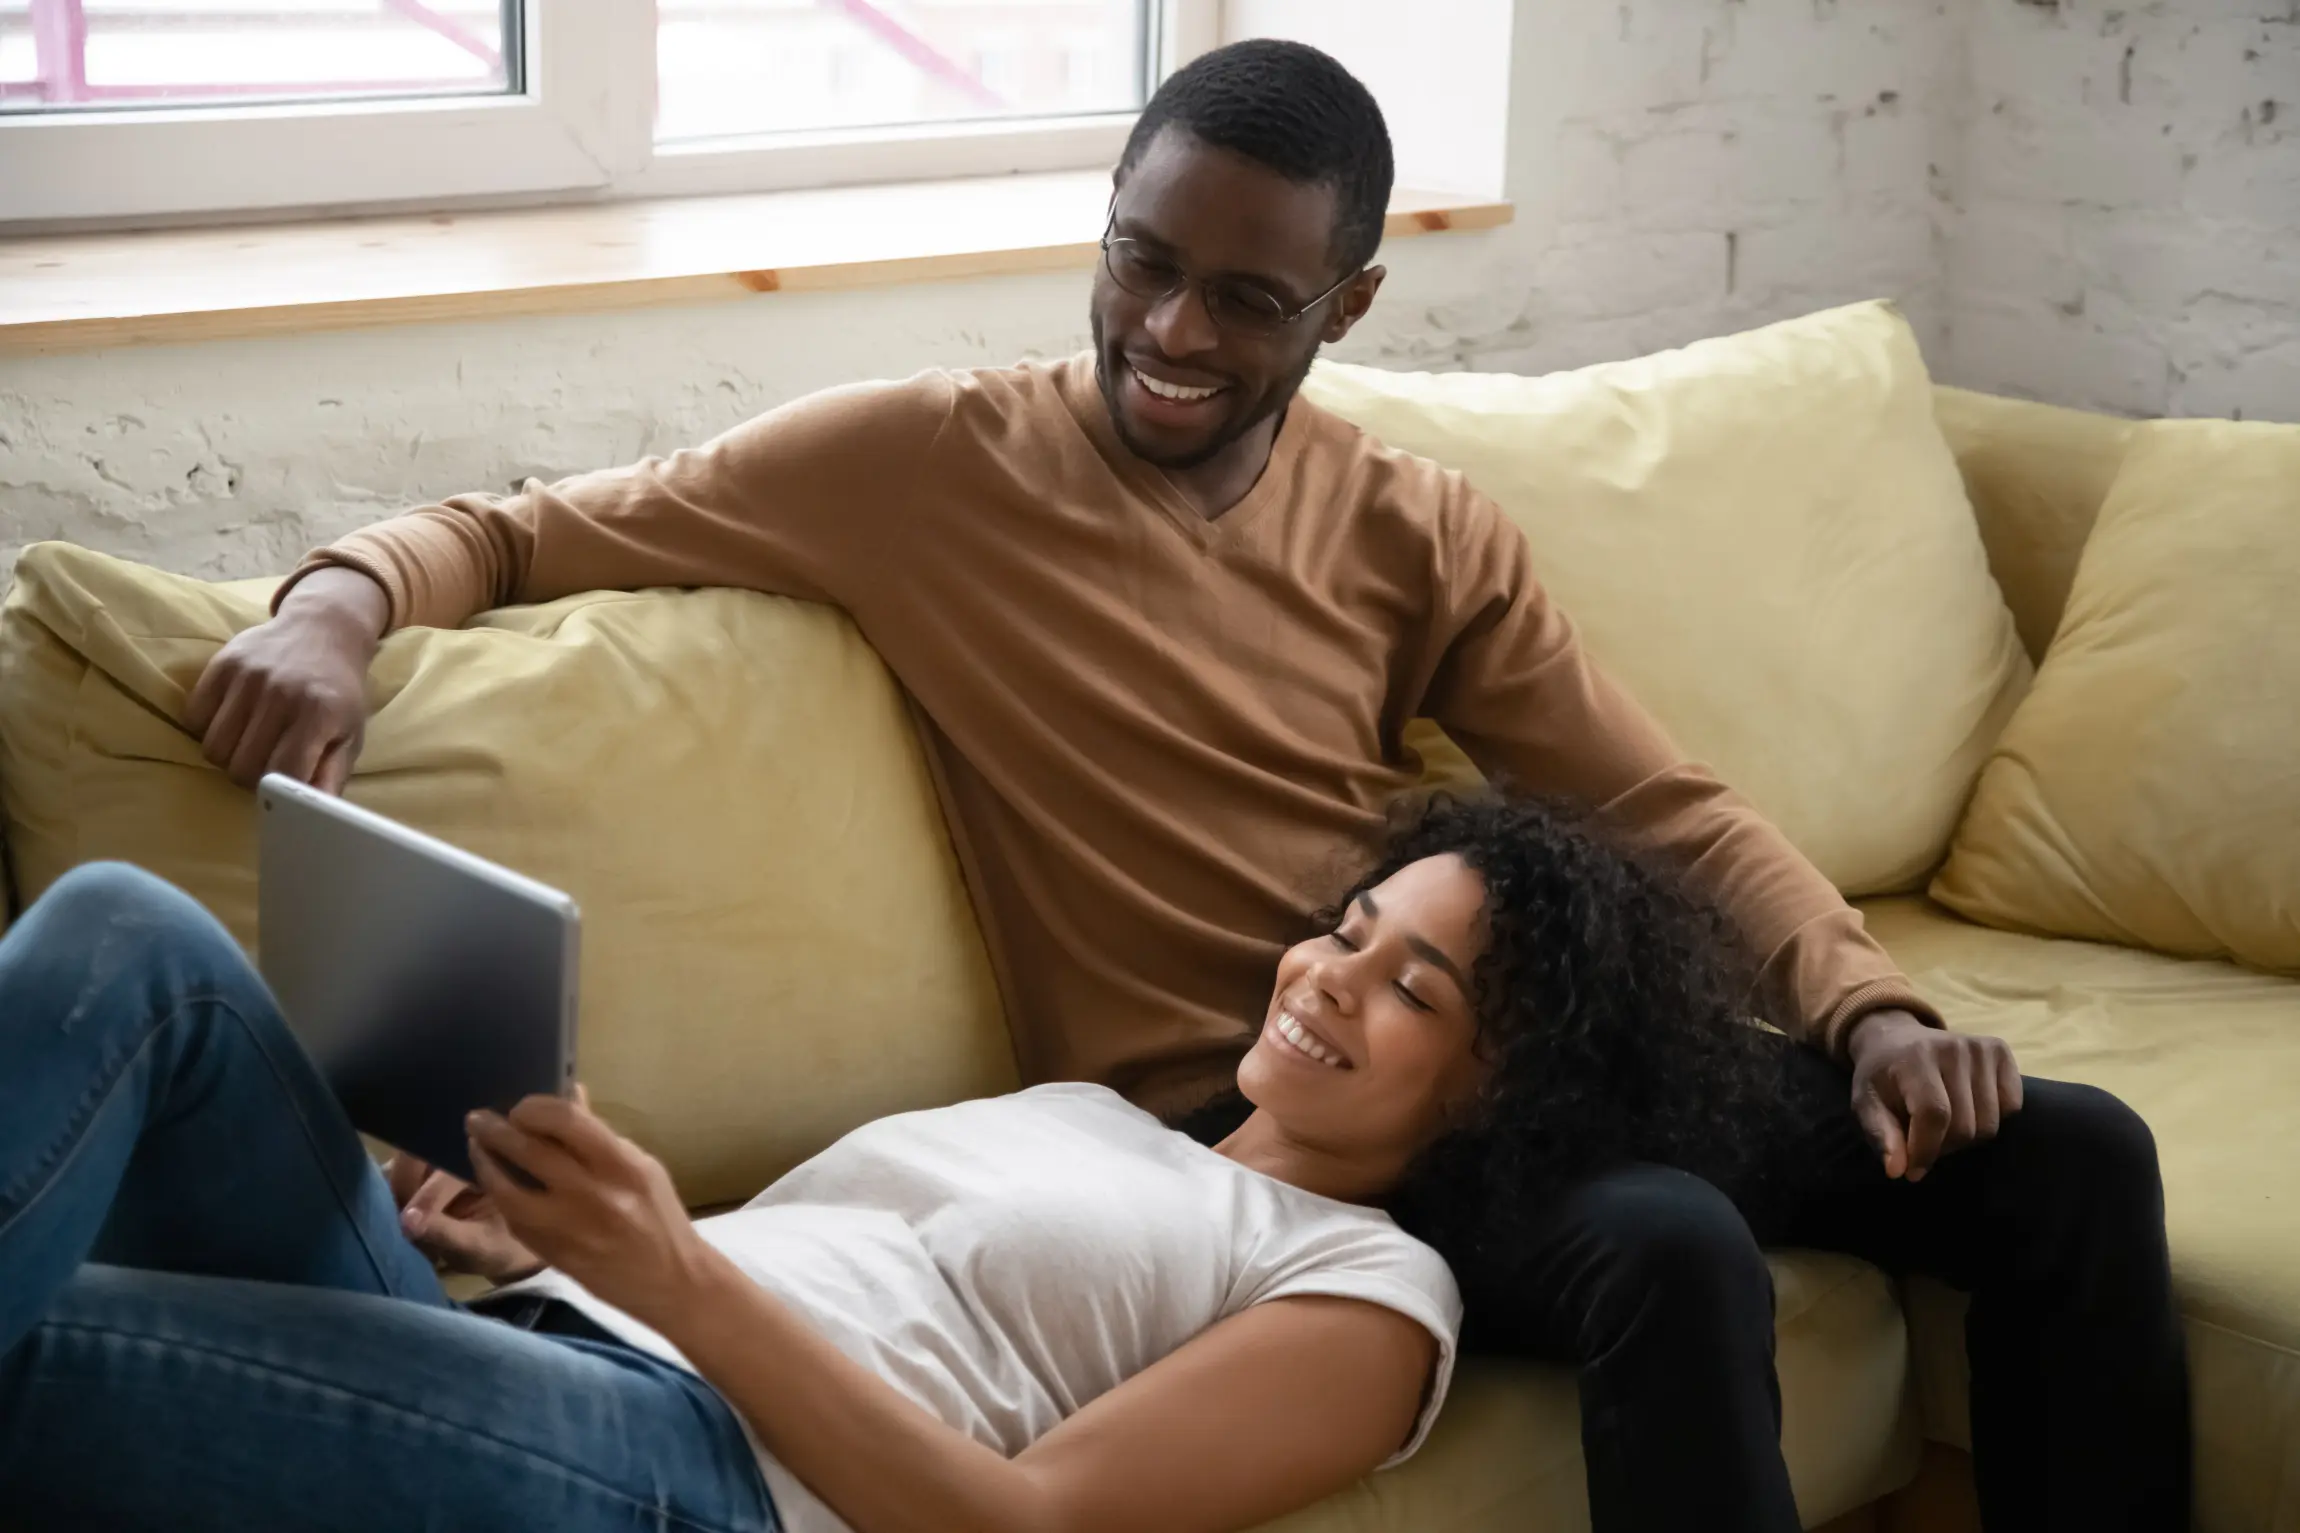 A young couple sits together on the sofa and watches a video on the tablet.